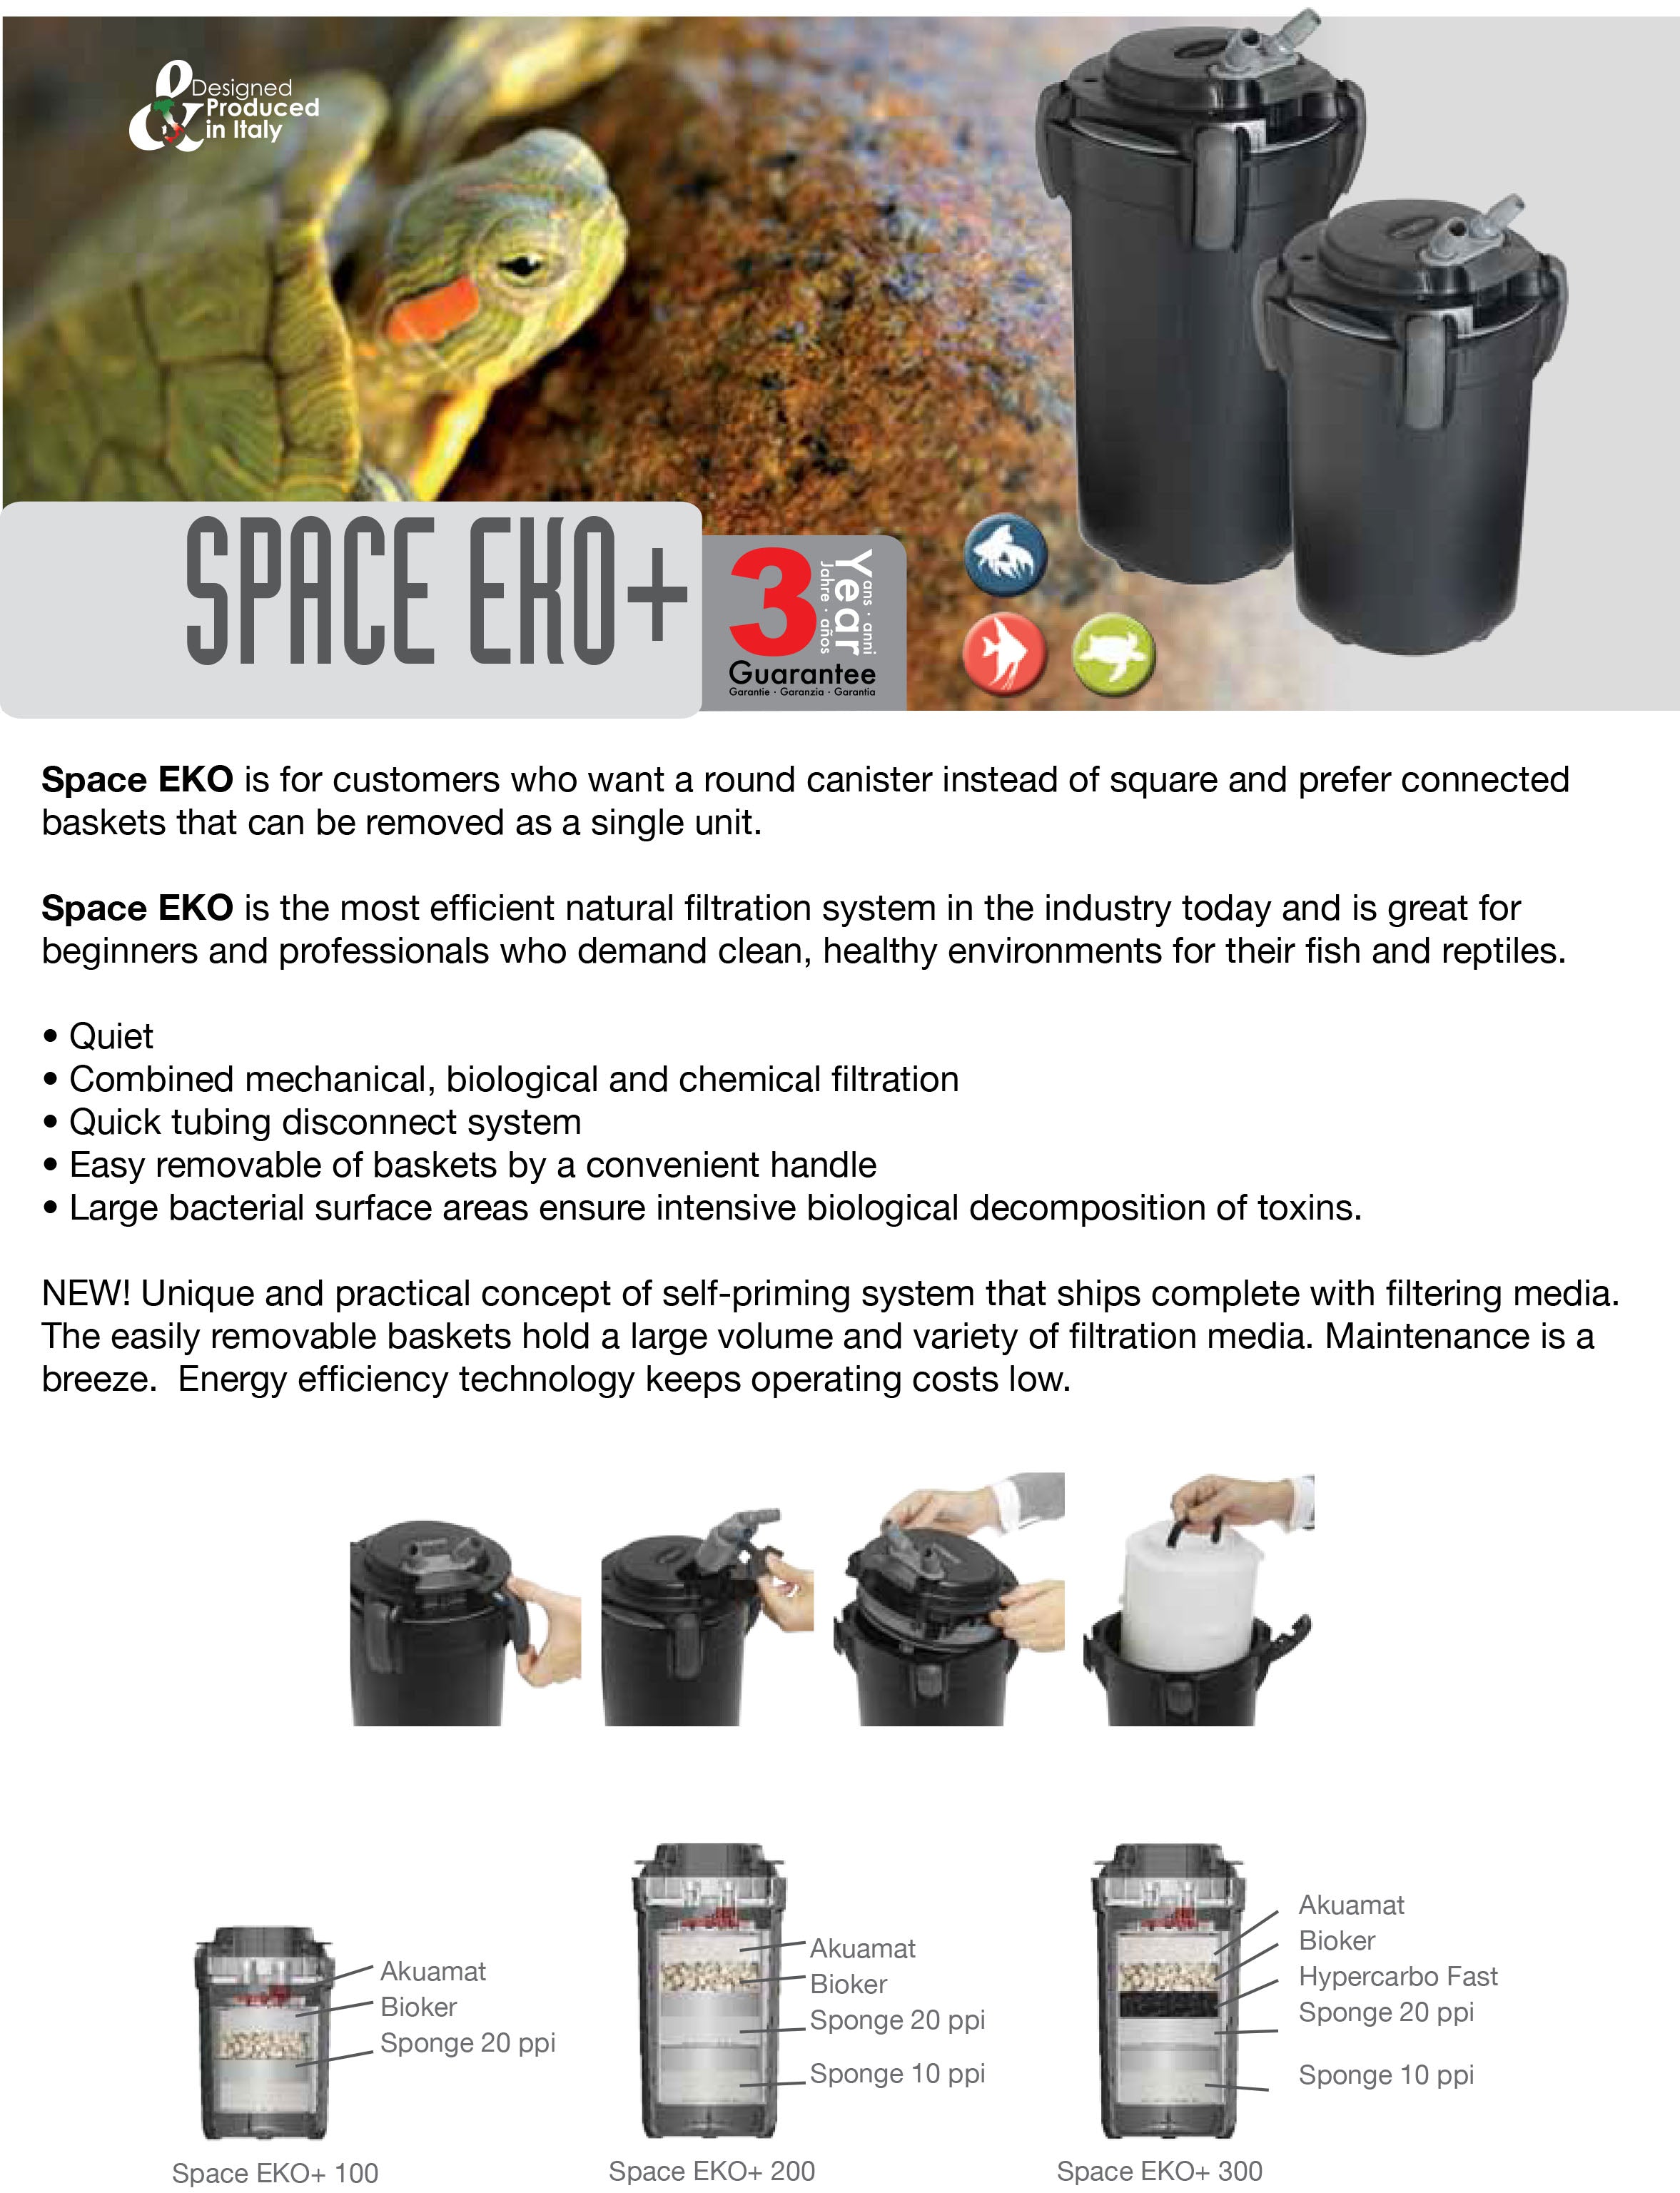 Sicce Space EKO+ 100 External Canister Filter - up to 30gal